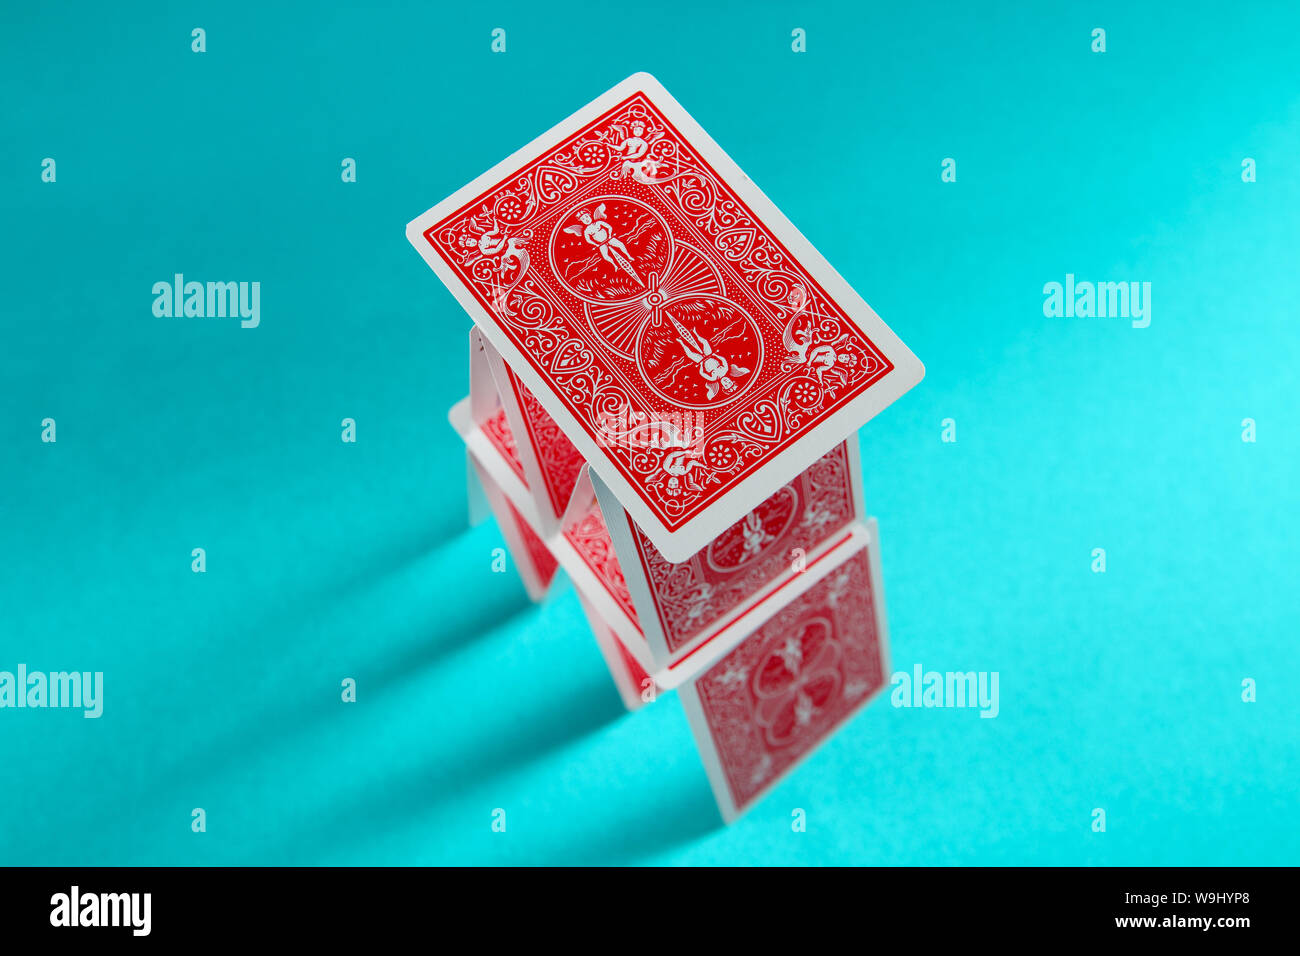 Model home made of playing cards Stock Photo